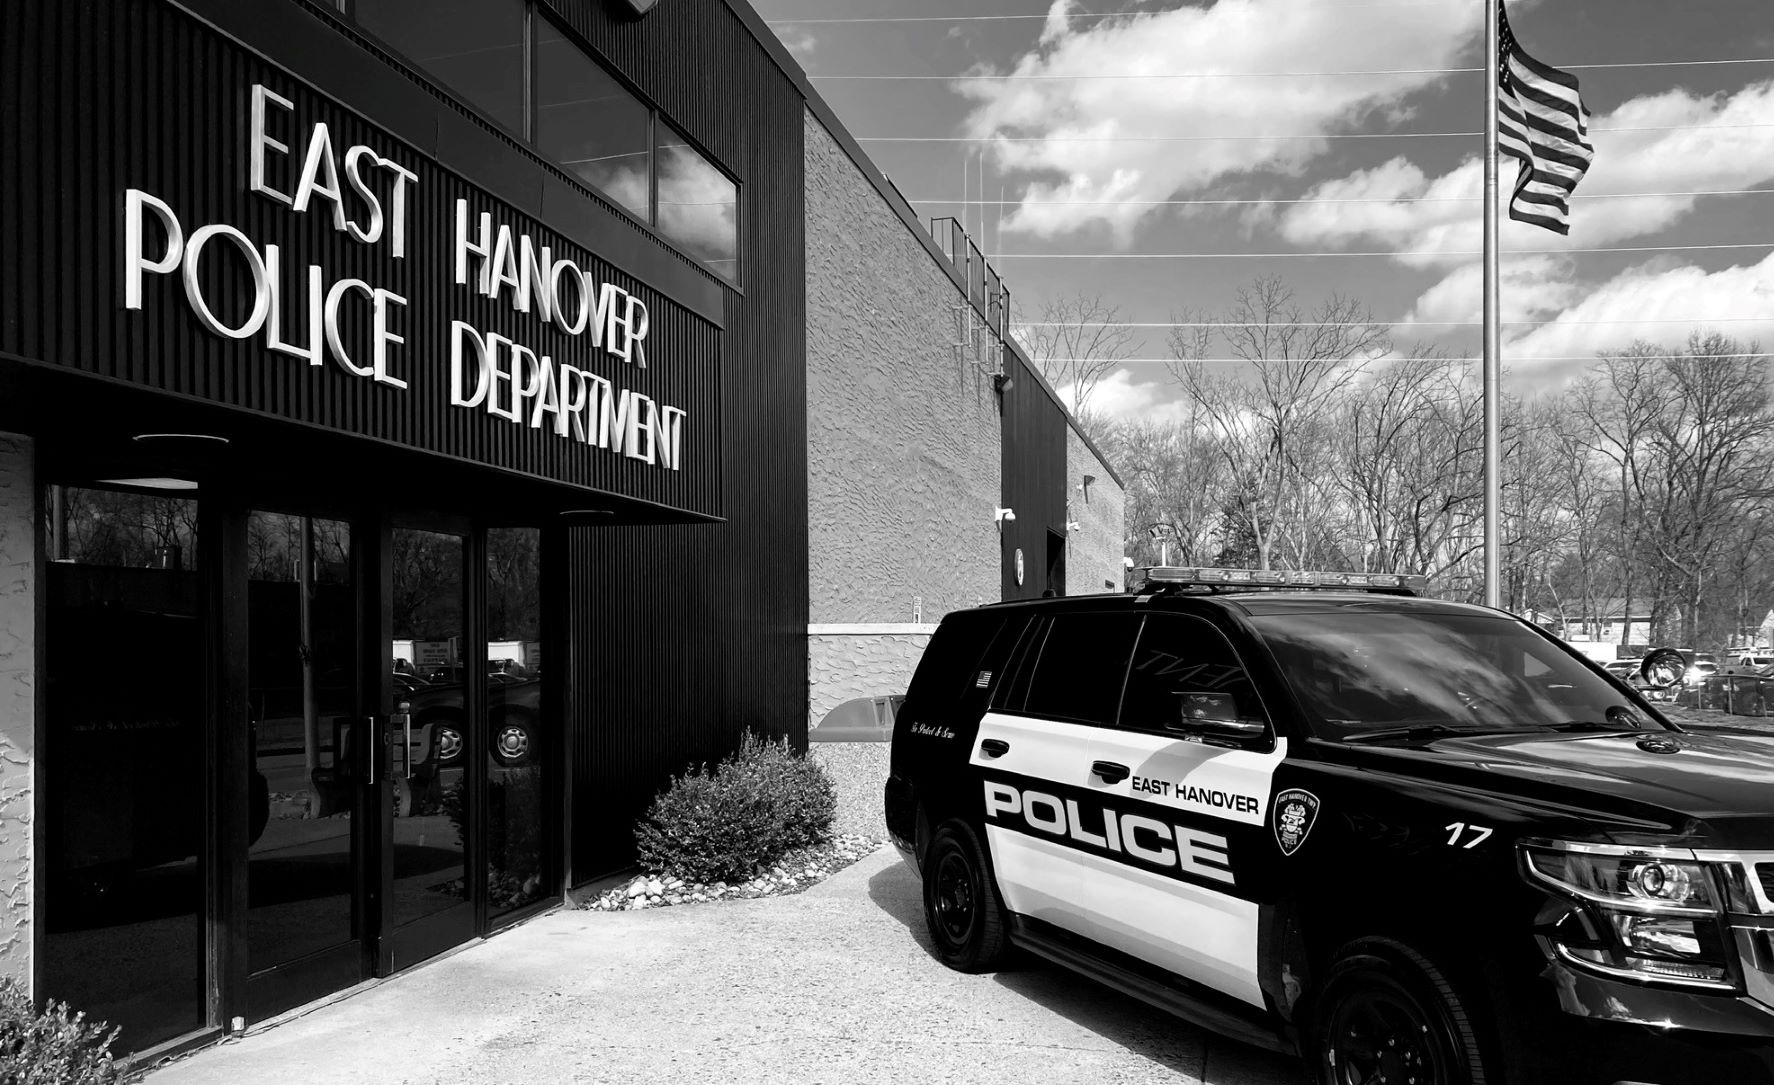 East Hanover Township Police Department, NJ Public Safety Jobs